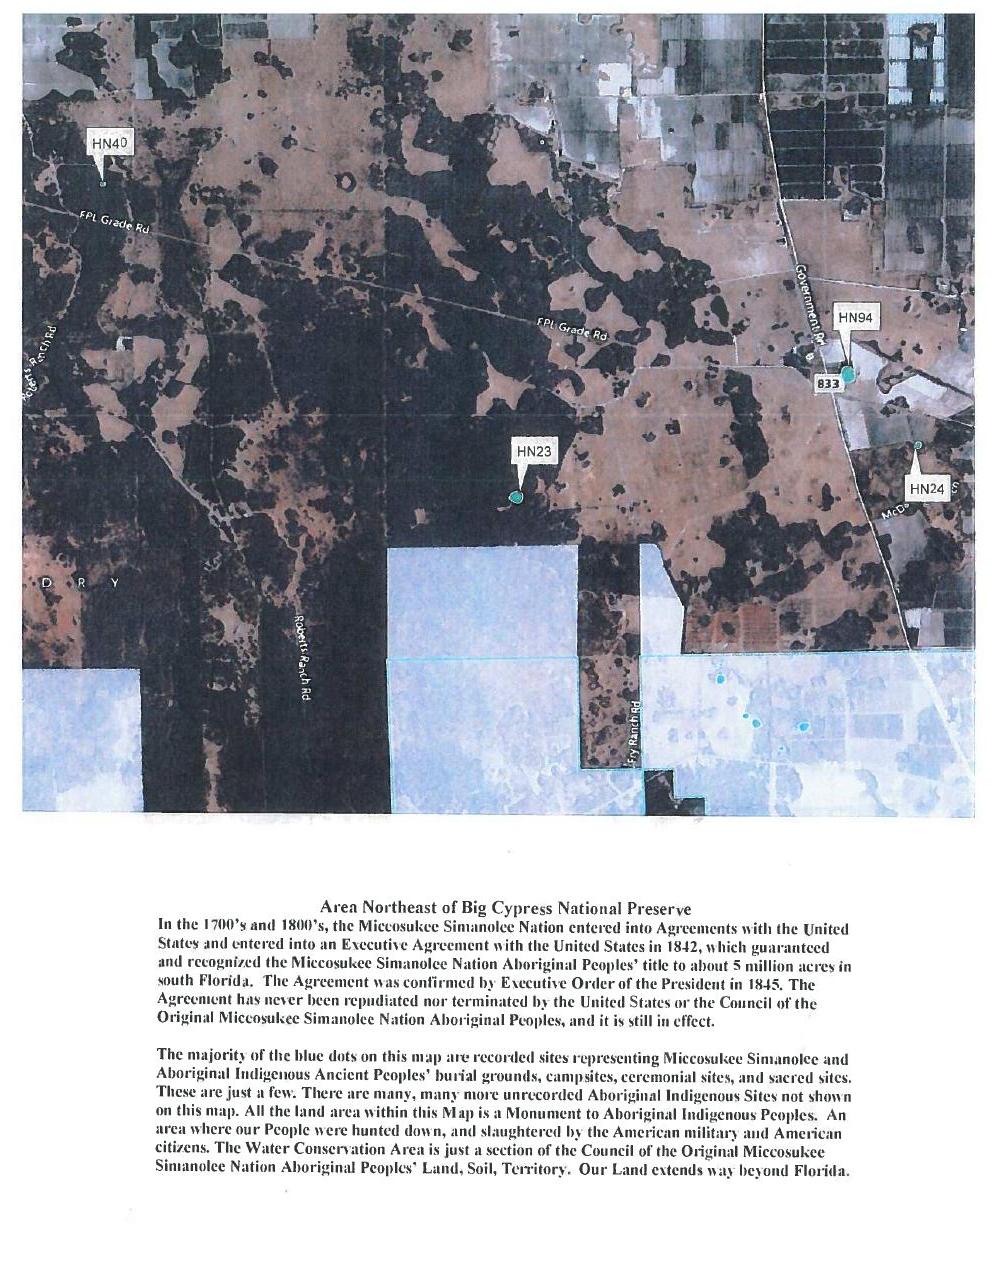 1000x1275 Area Northeast of Big Cypress National Preserve, in Council of the Original Miccosukee Simanolee Nation, by John S. Quarterman, for SpectraBusters.org, 21 November 2013